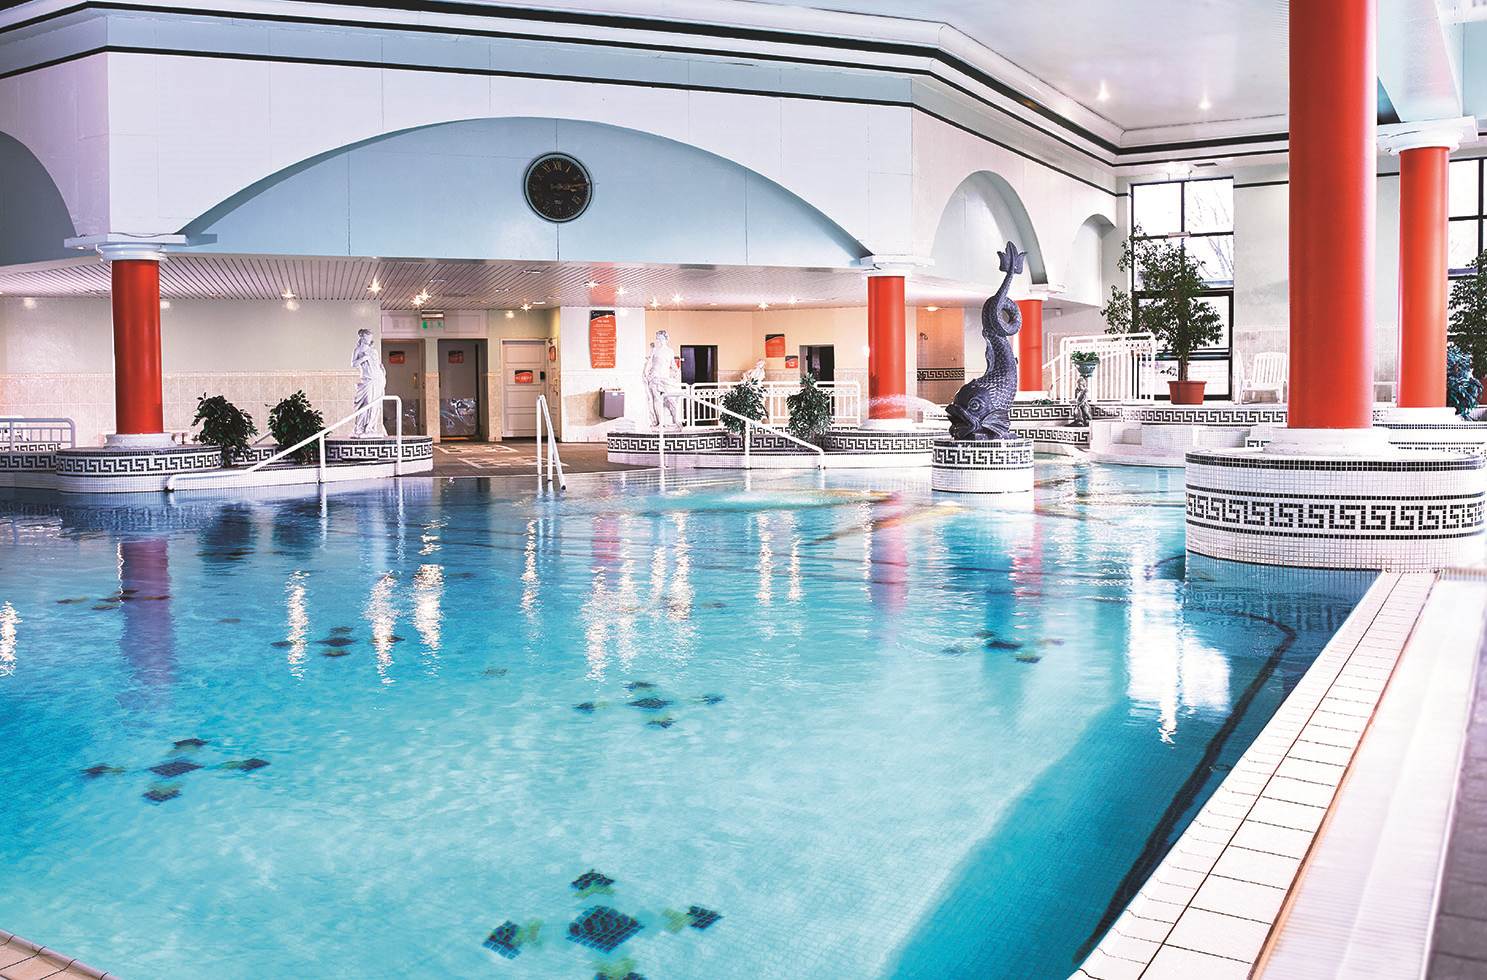 The Connacht Hotel Pool in Galway